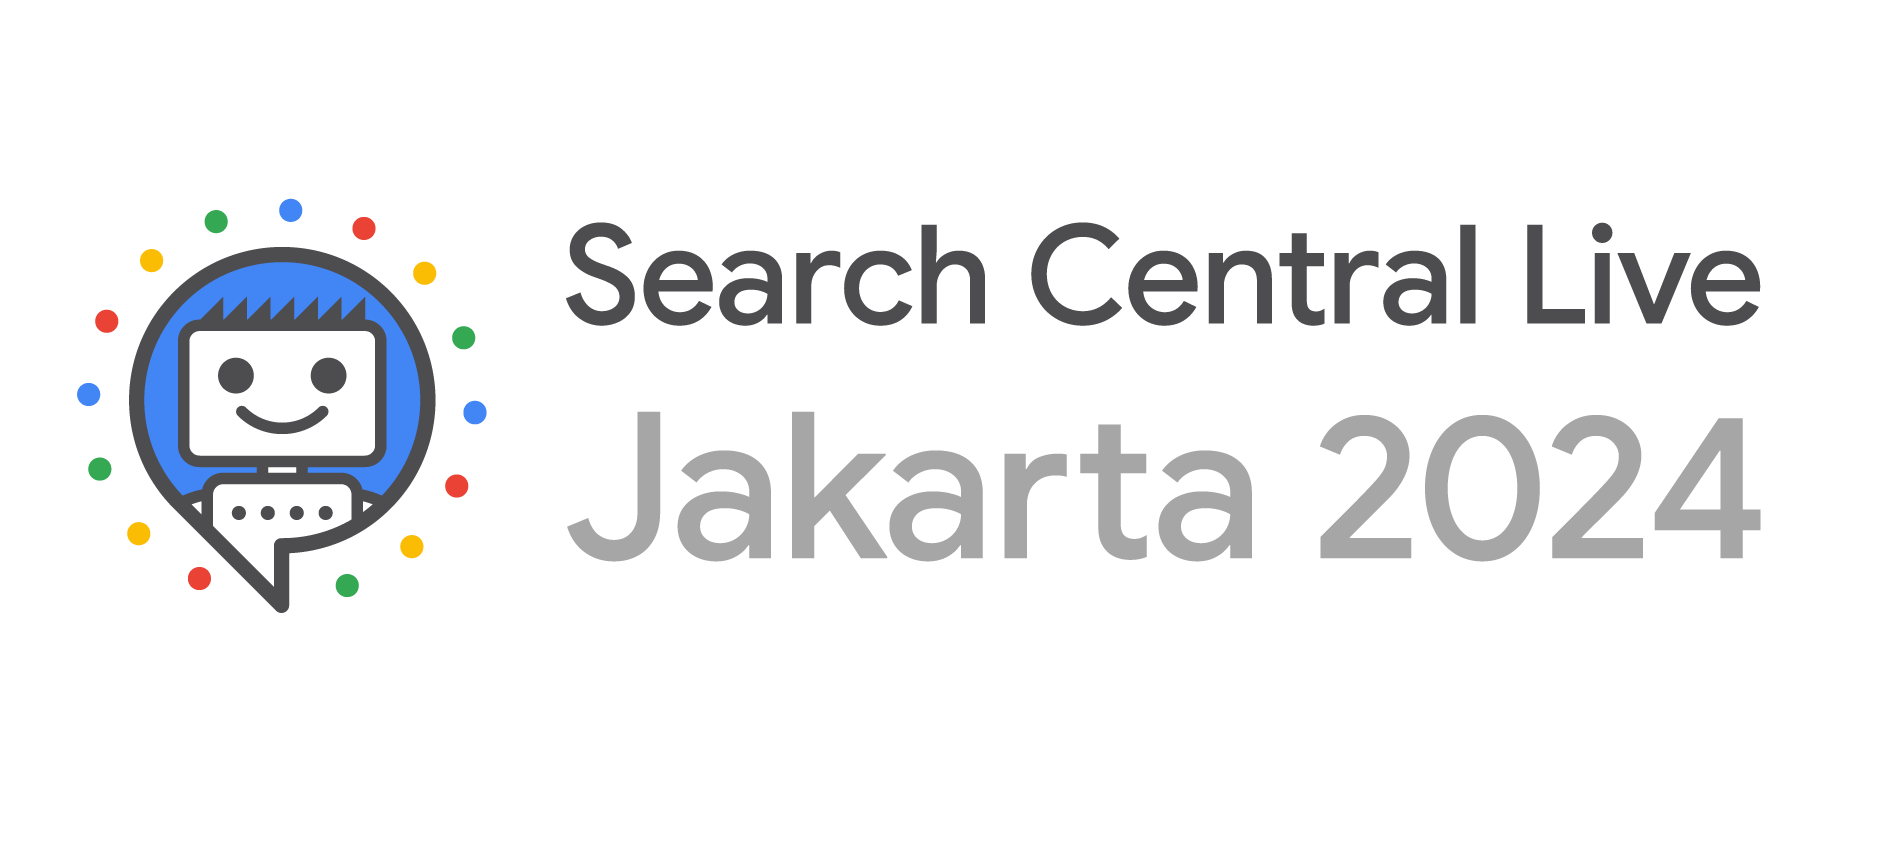 Search Central Live Yakarta 2024